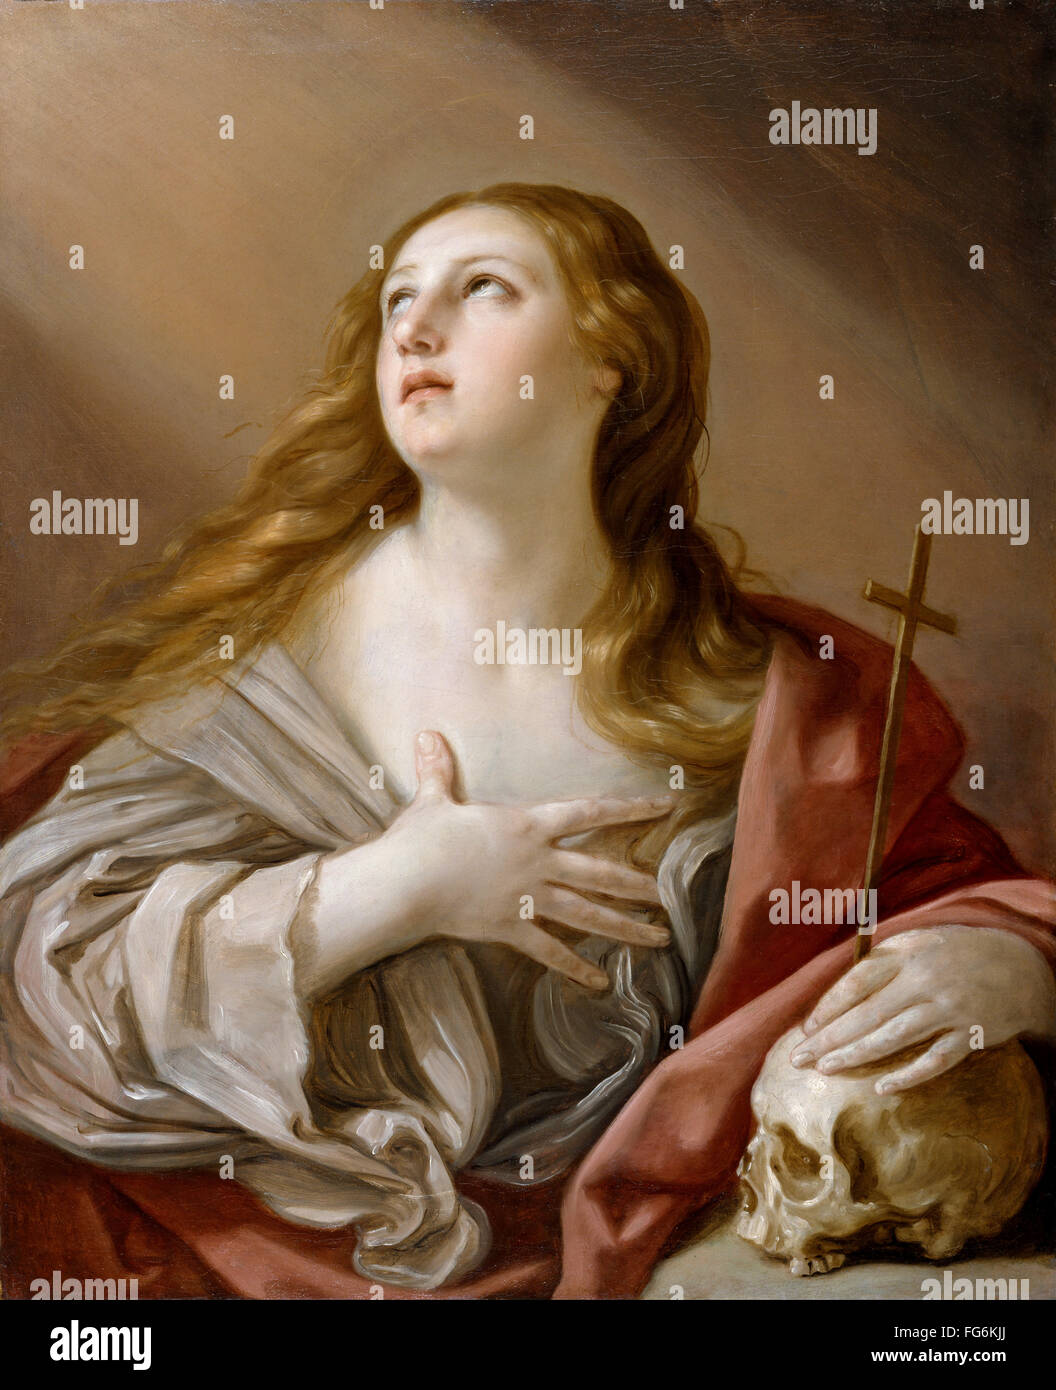 Mary Magdalene or Mary of Magdala, The Magdalene, is a figure in Christianity. Mary Magdalene travelled with Jesus as one of his followers. She is said to have witnessed Jesus' crucifixion and resurrection. Stock Photo